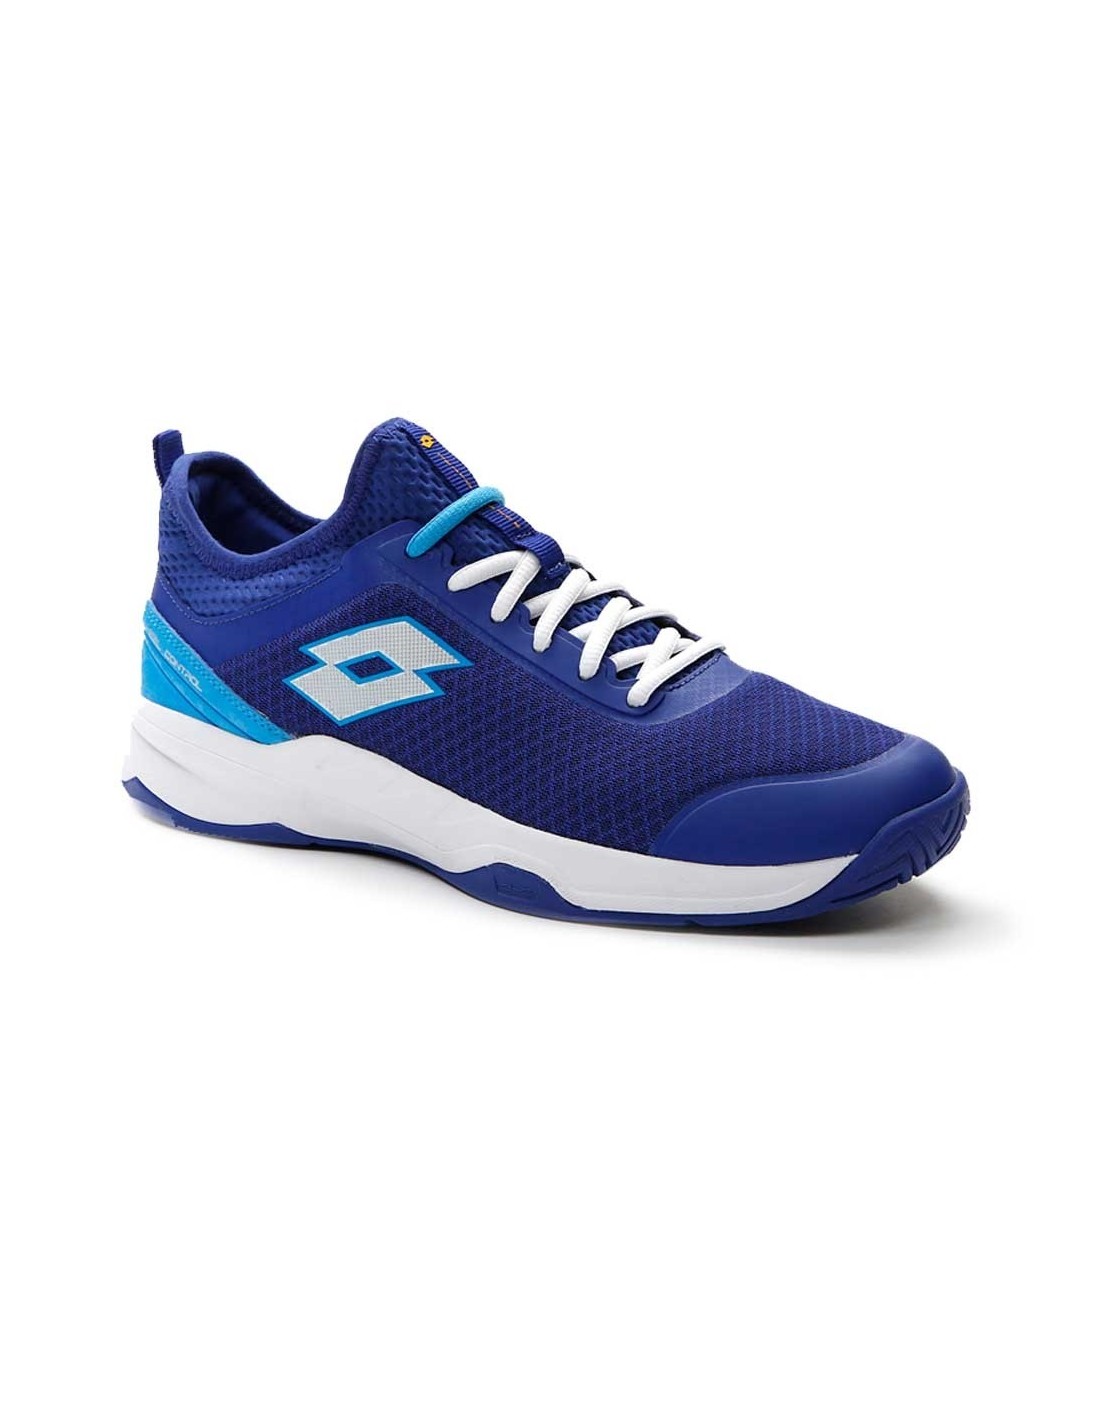 Lotto Mirage 500 Ii Alr 216634 8ss Padel Lotto Shoes